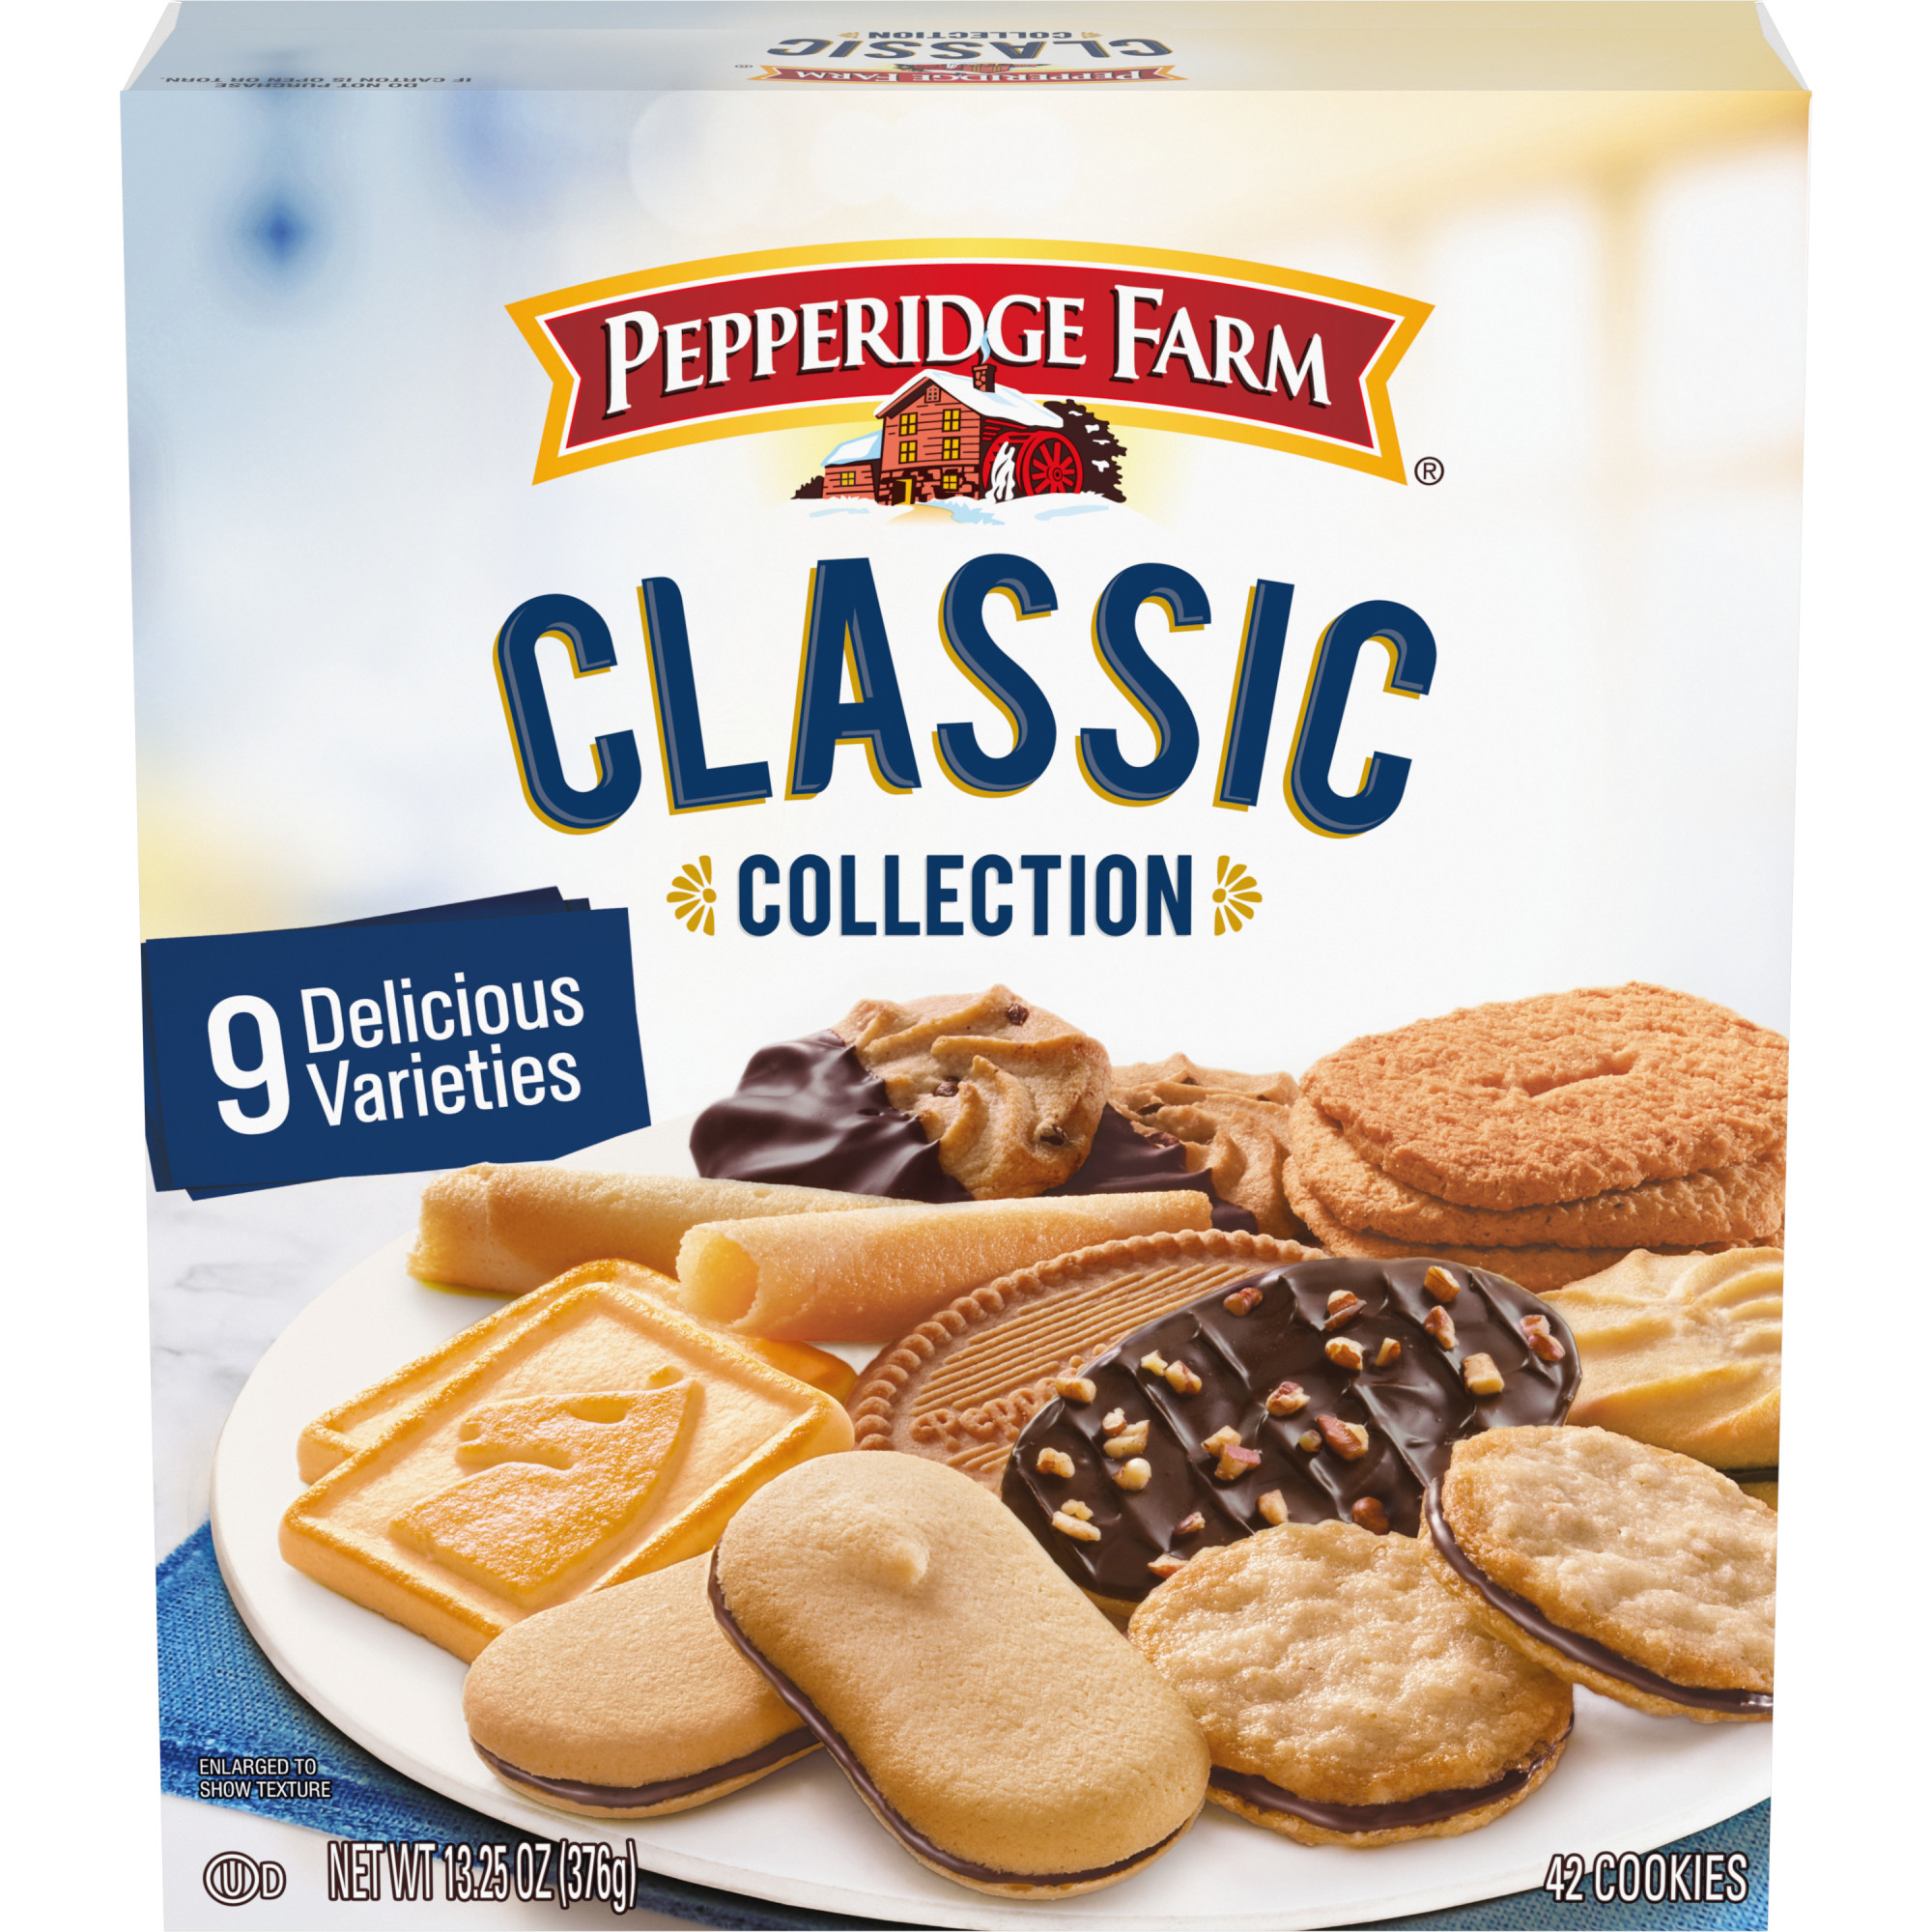 Pepperidge Farm Cookies Classic Collection, 9 Cookie Varieties, 13.25 oz. Box - image 1 of 8